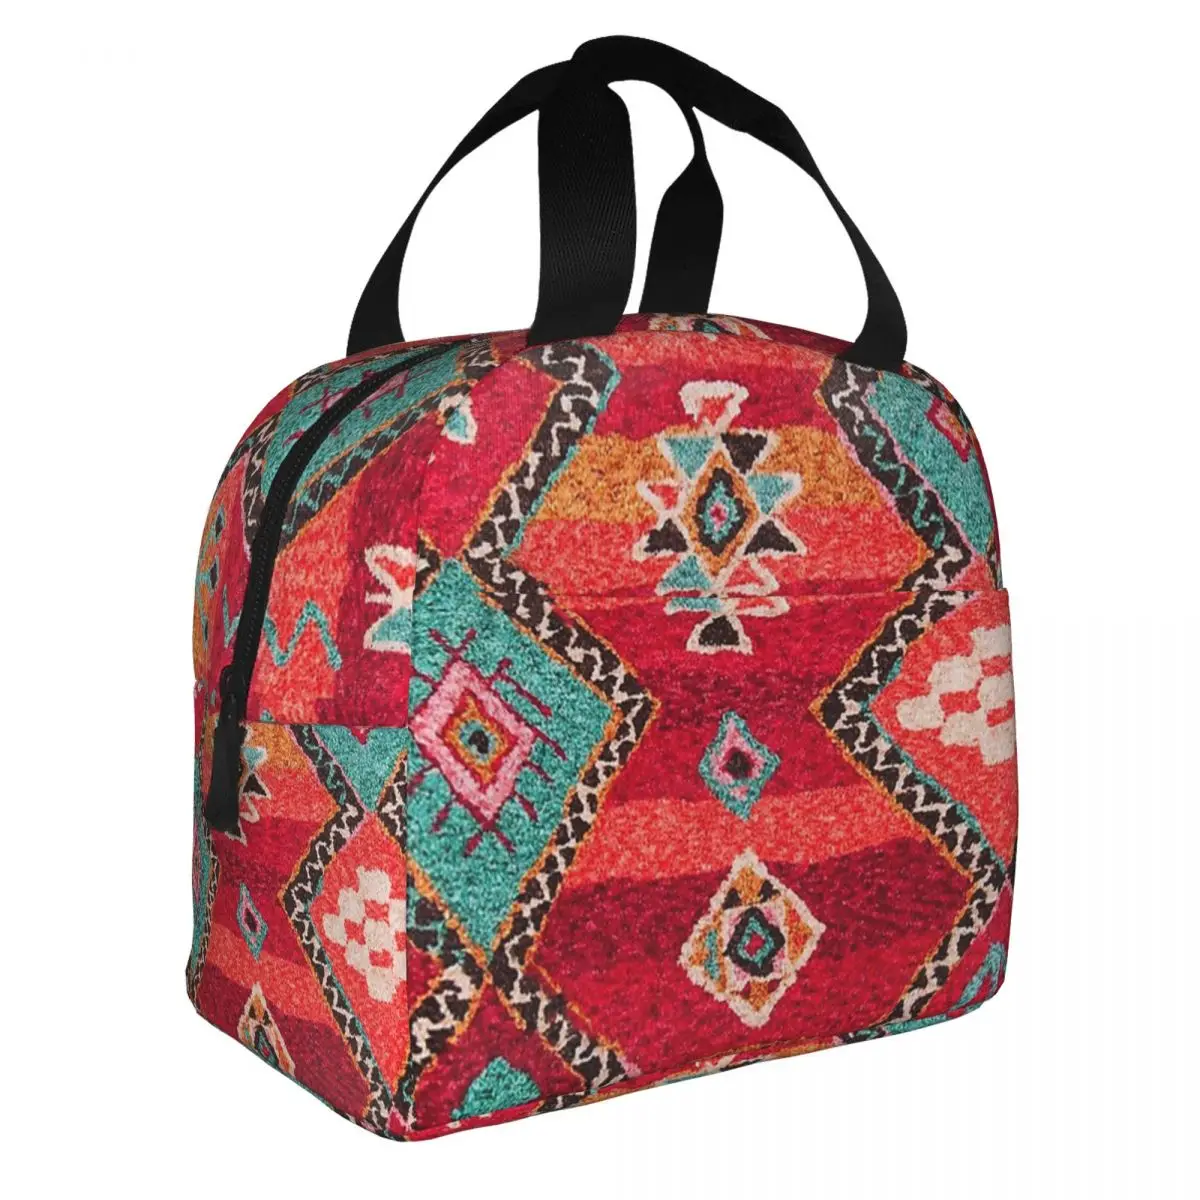 Traditional Colored Anthropologie Bohemian Moroccan Lunch Bag Waterproof Insulated Cooler Bag Thermal Picnic Lunch Box for Women